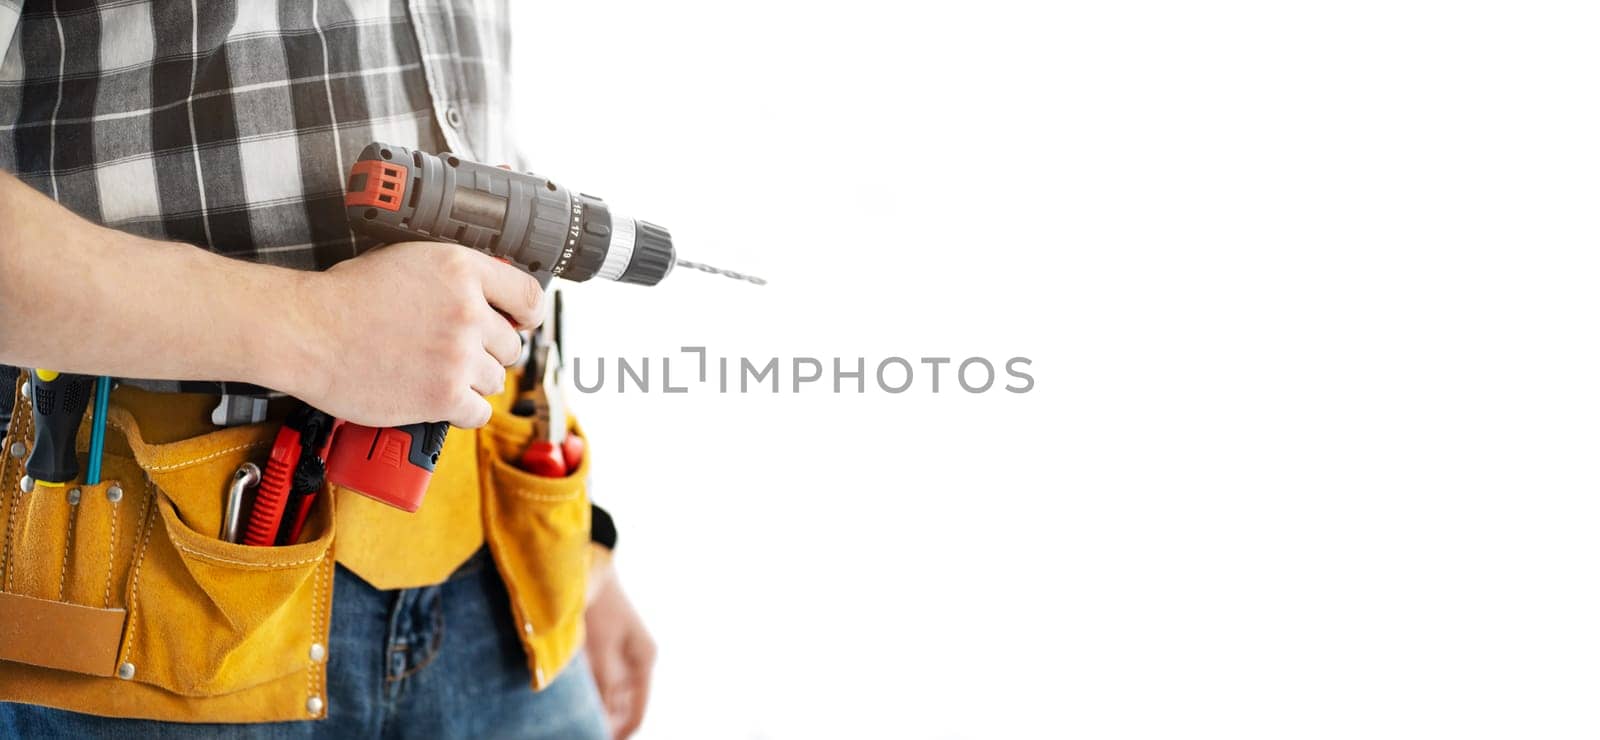 Man wearing mounting belt with tools for repair holding drill in hands isolated on white background. Professional equipment of handyman